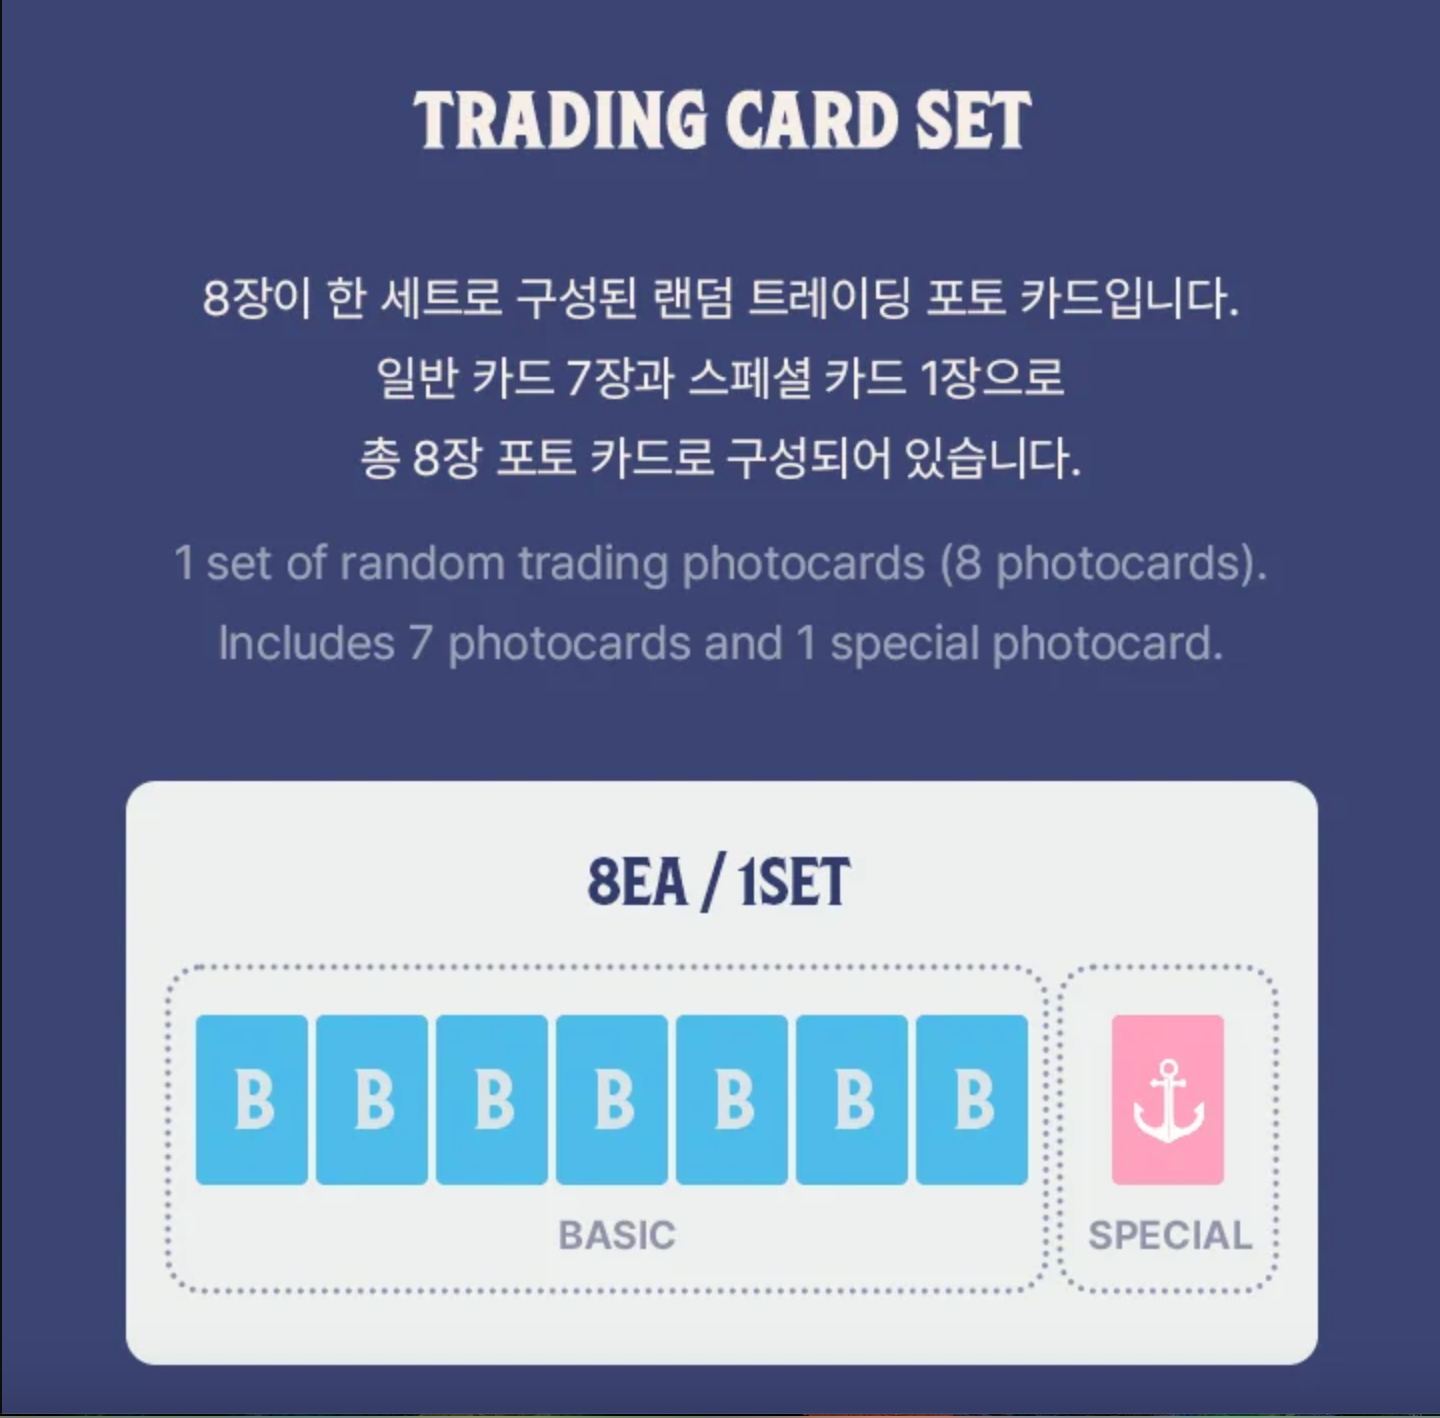 Seventeen Cafe In Seoul: Trading Card Set